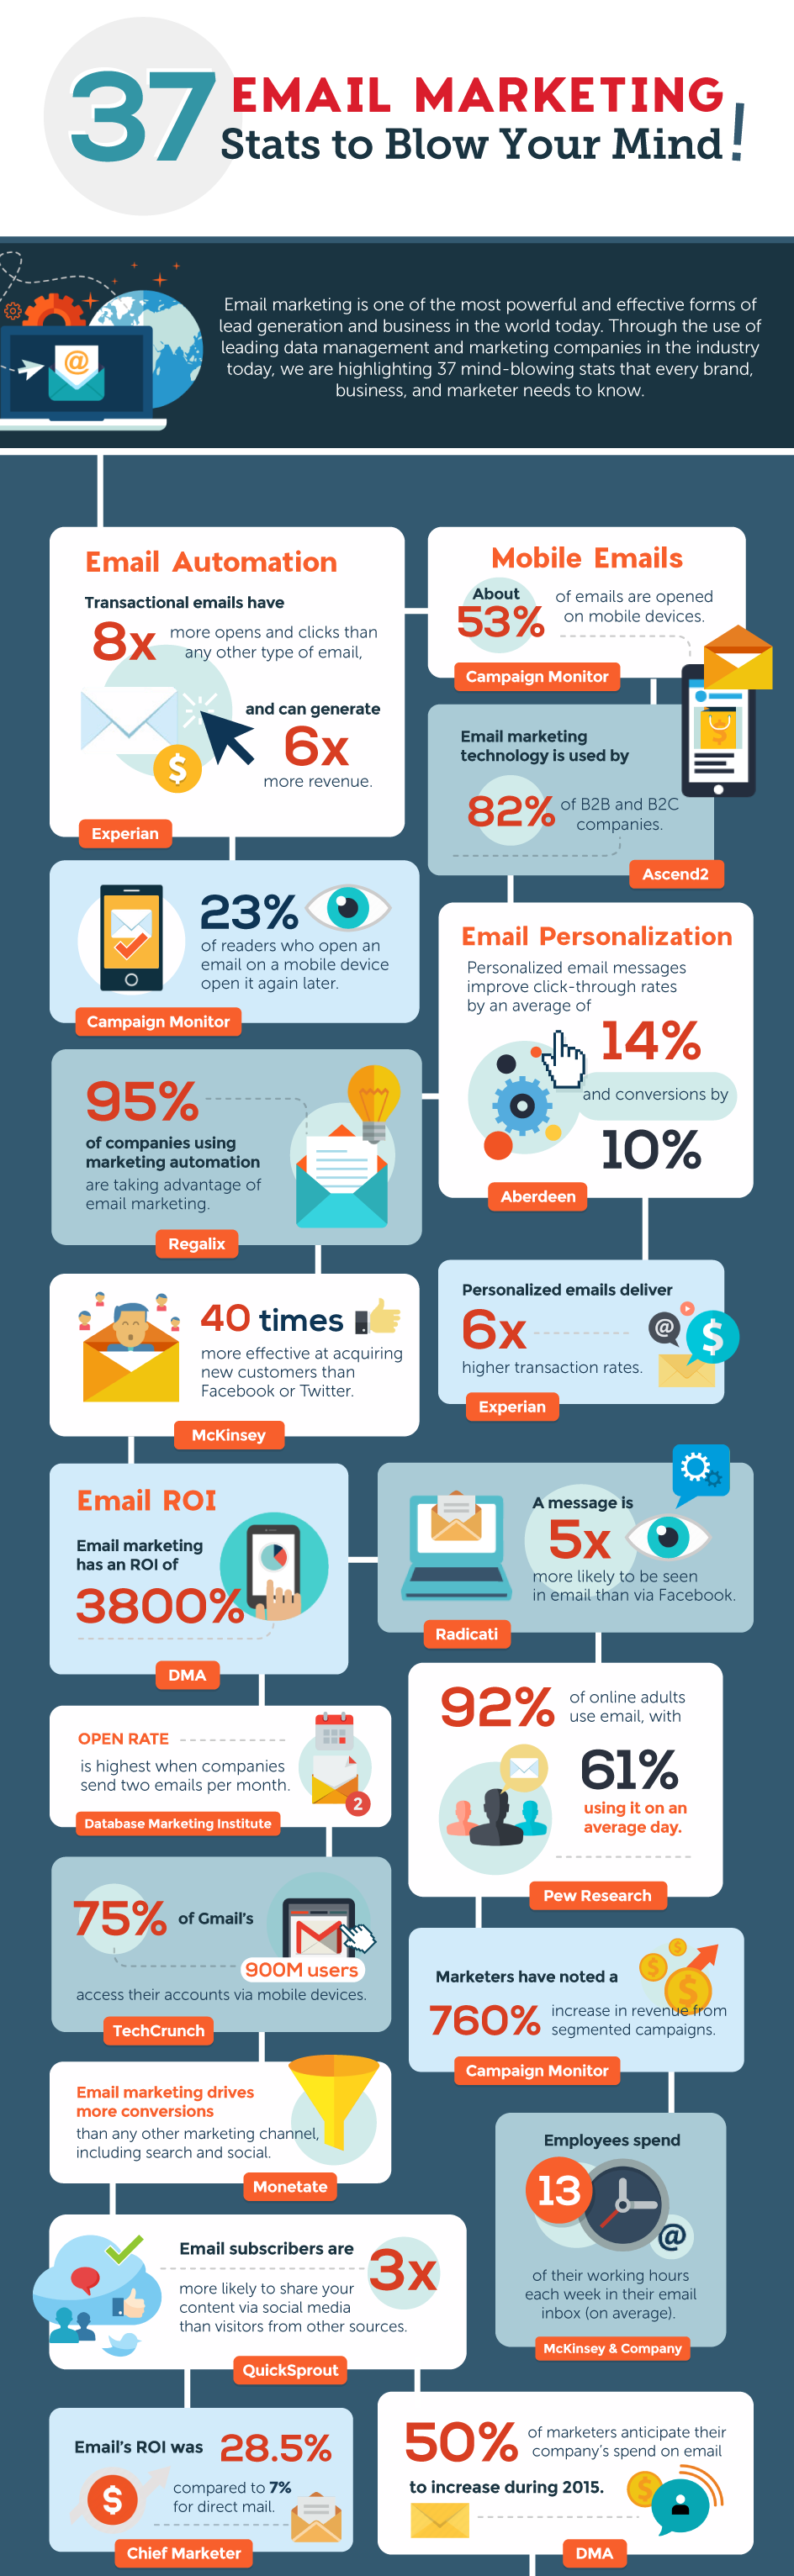 37 email marketing stats to blow your mind hd 1